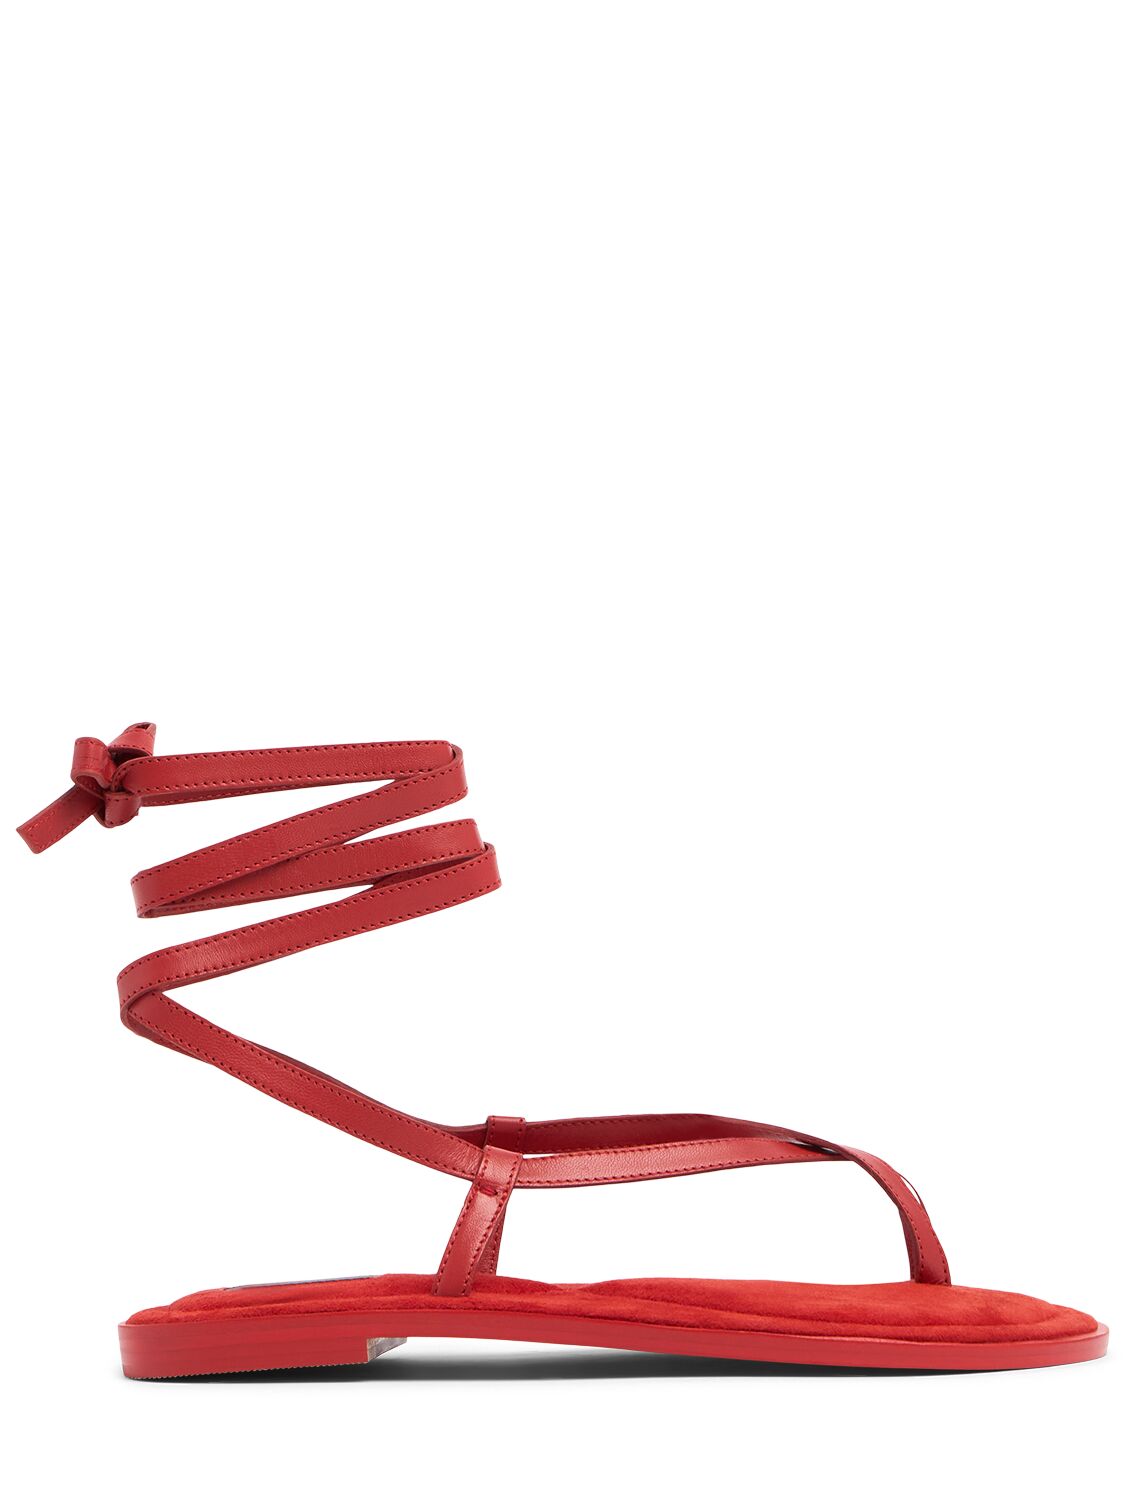 A.emery 10mm Elliot Suede Sandals In Red